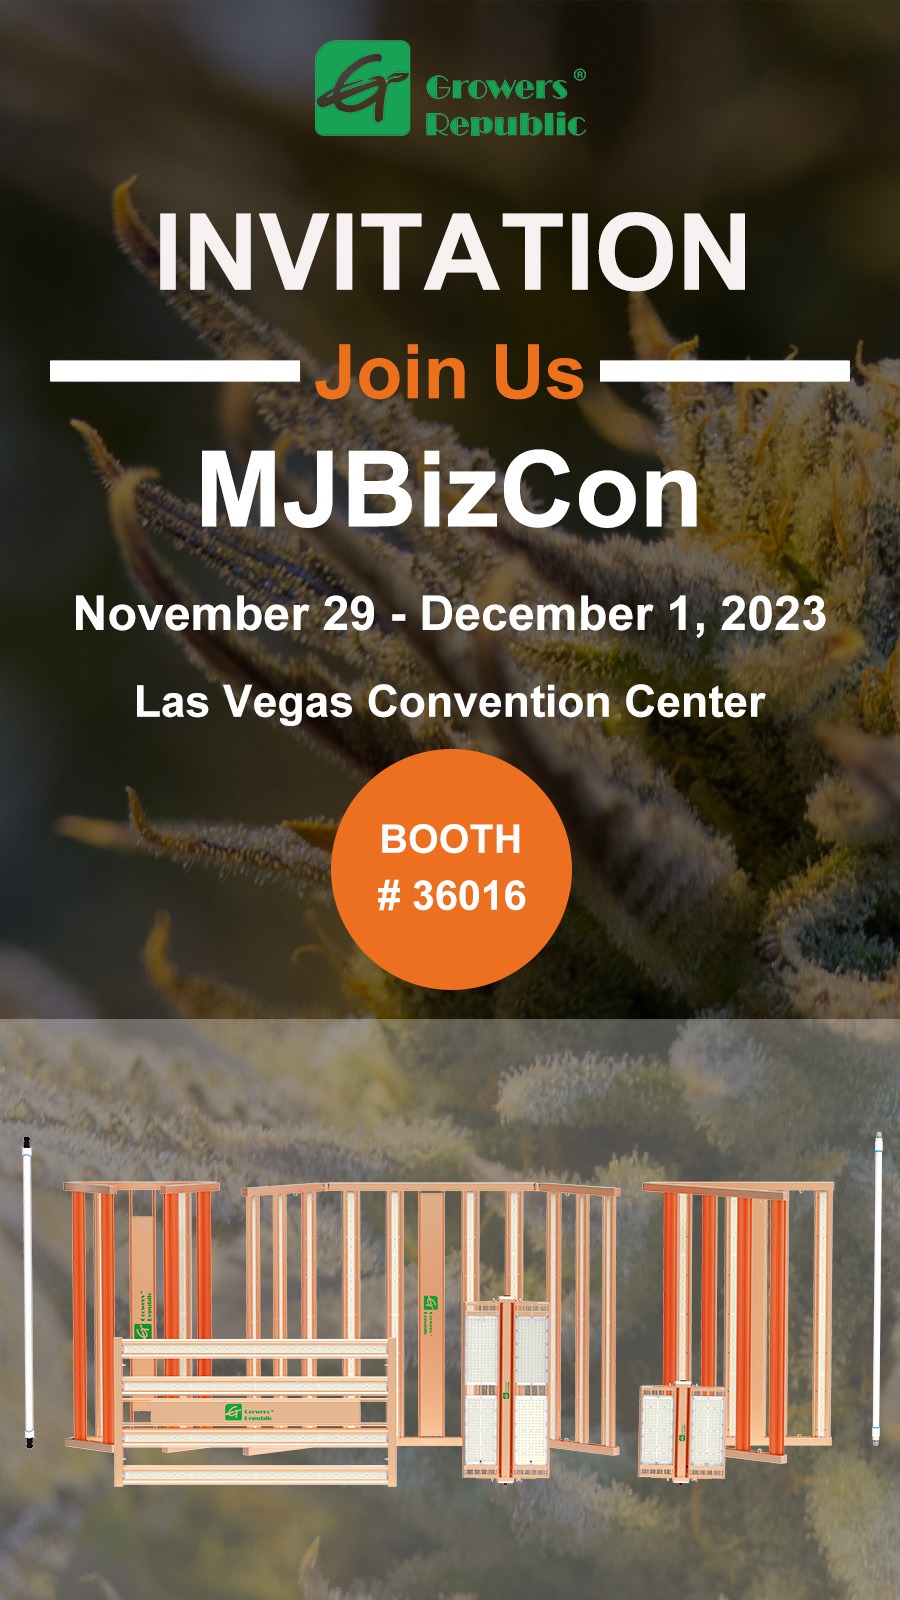 Warm Welcome To Our Booth #36016 In MJBizCon Las Vegas 963